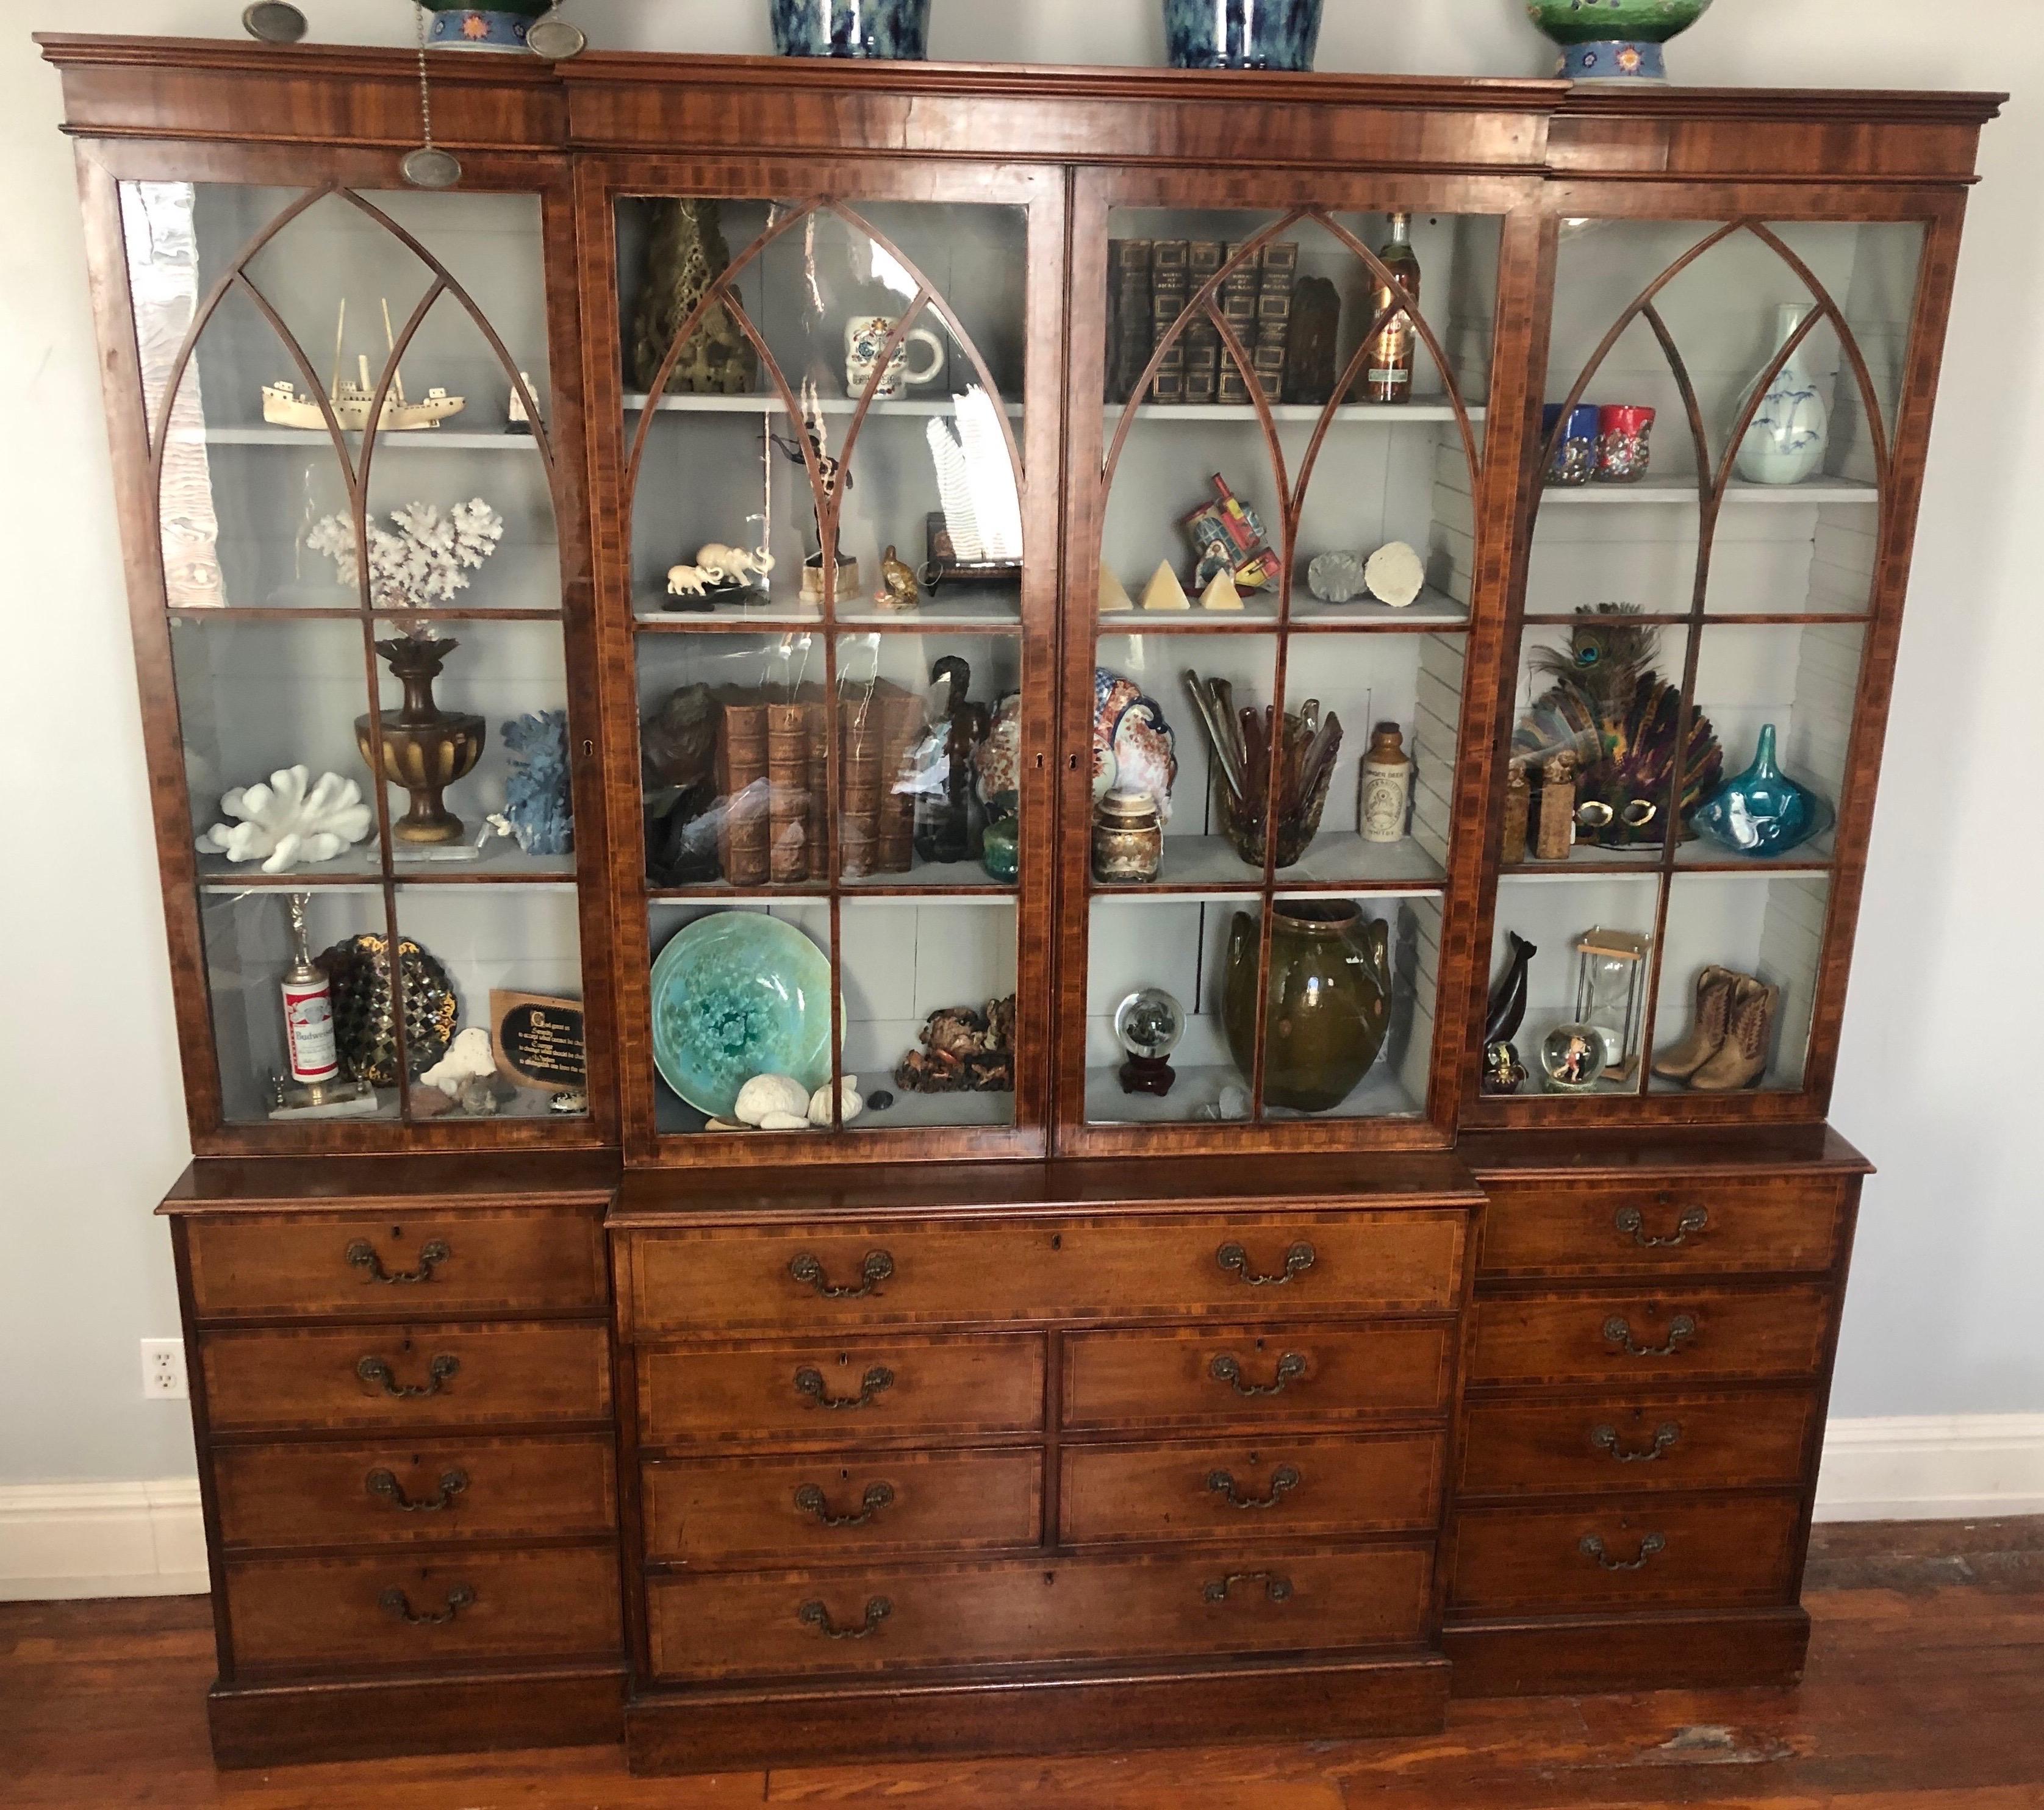 Fine period Georgian breakfront bookcase in mahogany with string inlay, crossbanding, and secretaries desk. 

Bookcase is made of 6 pieces. Top has crossbanded mahogany glazed doorswith a Gothic arch design. Bottom consists of 14 total drawers